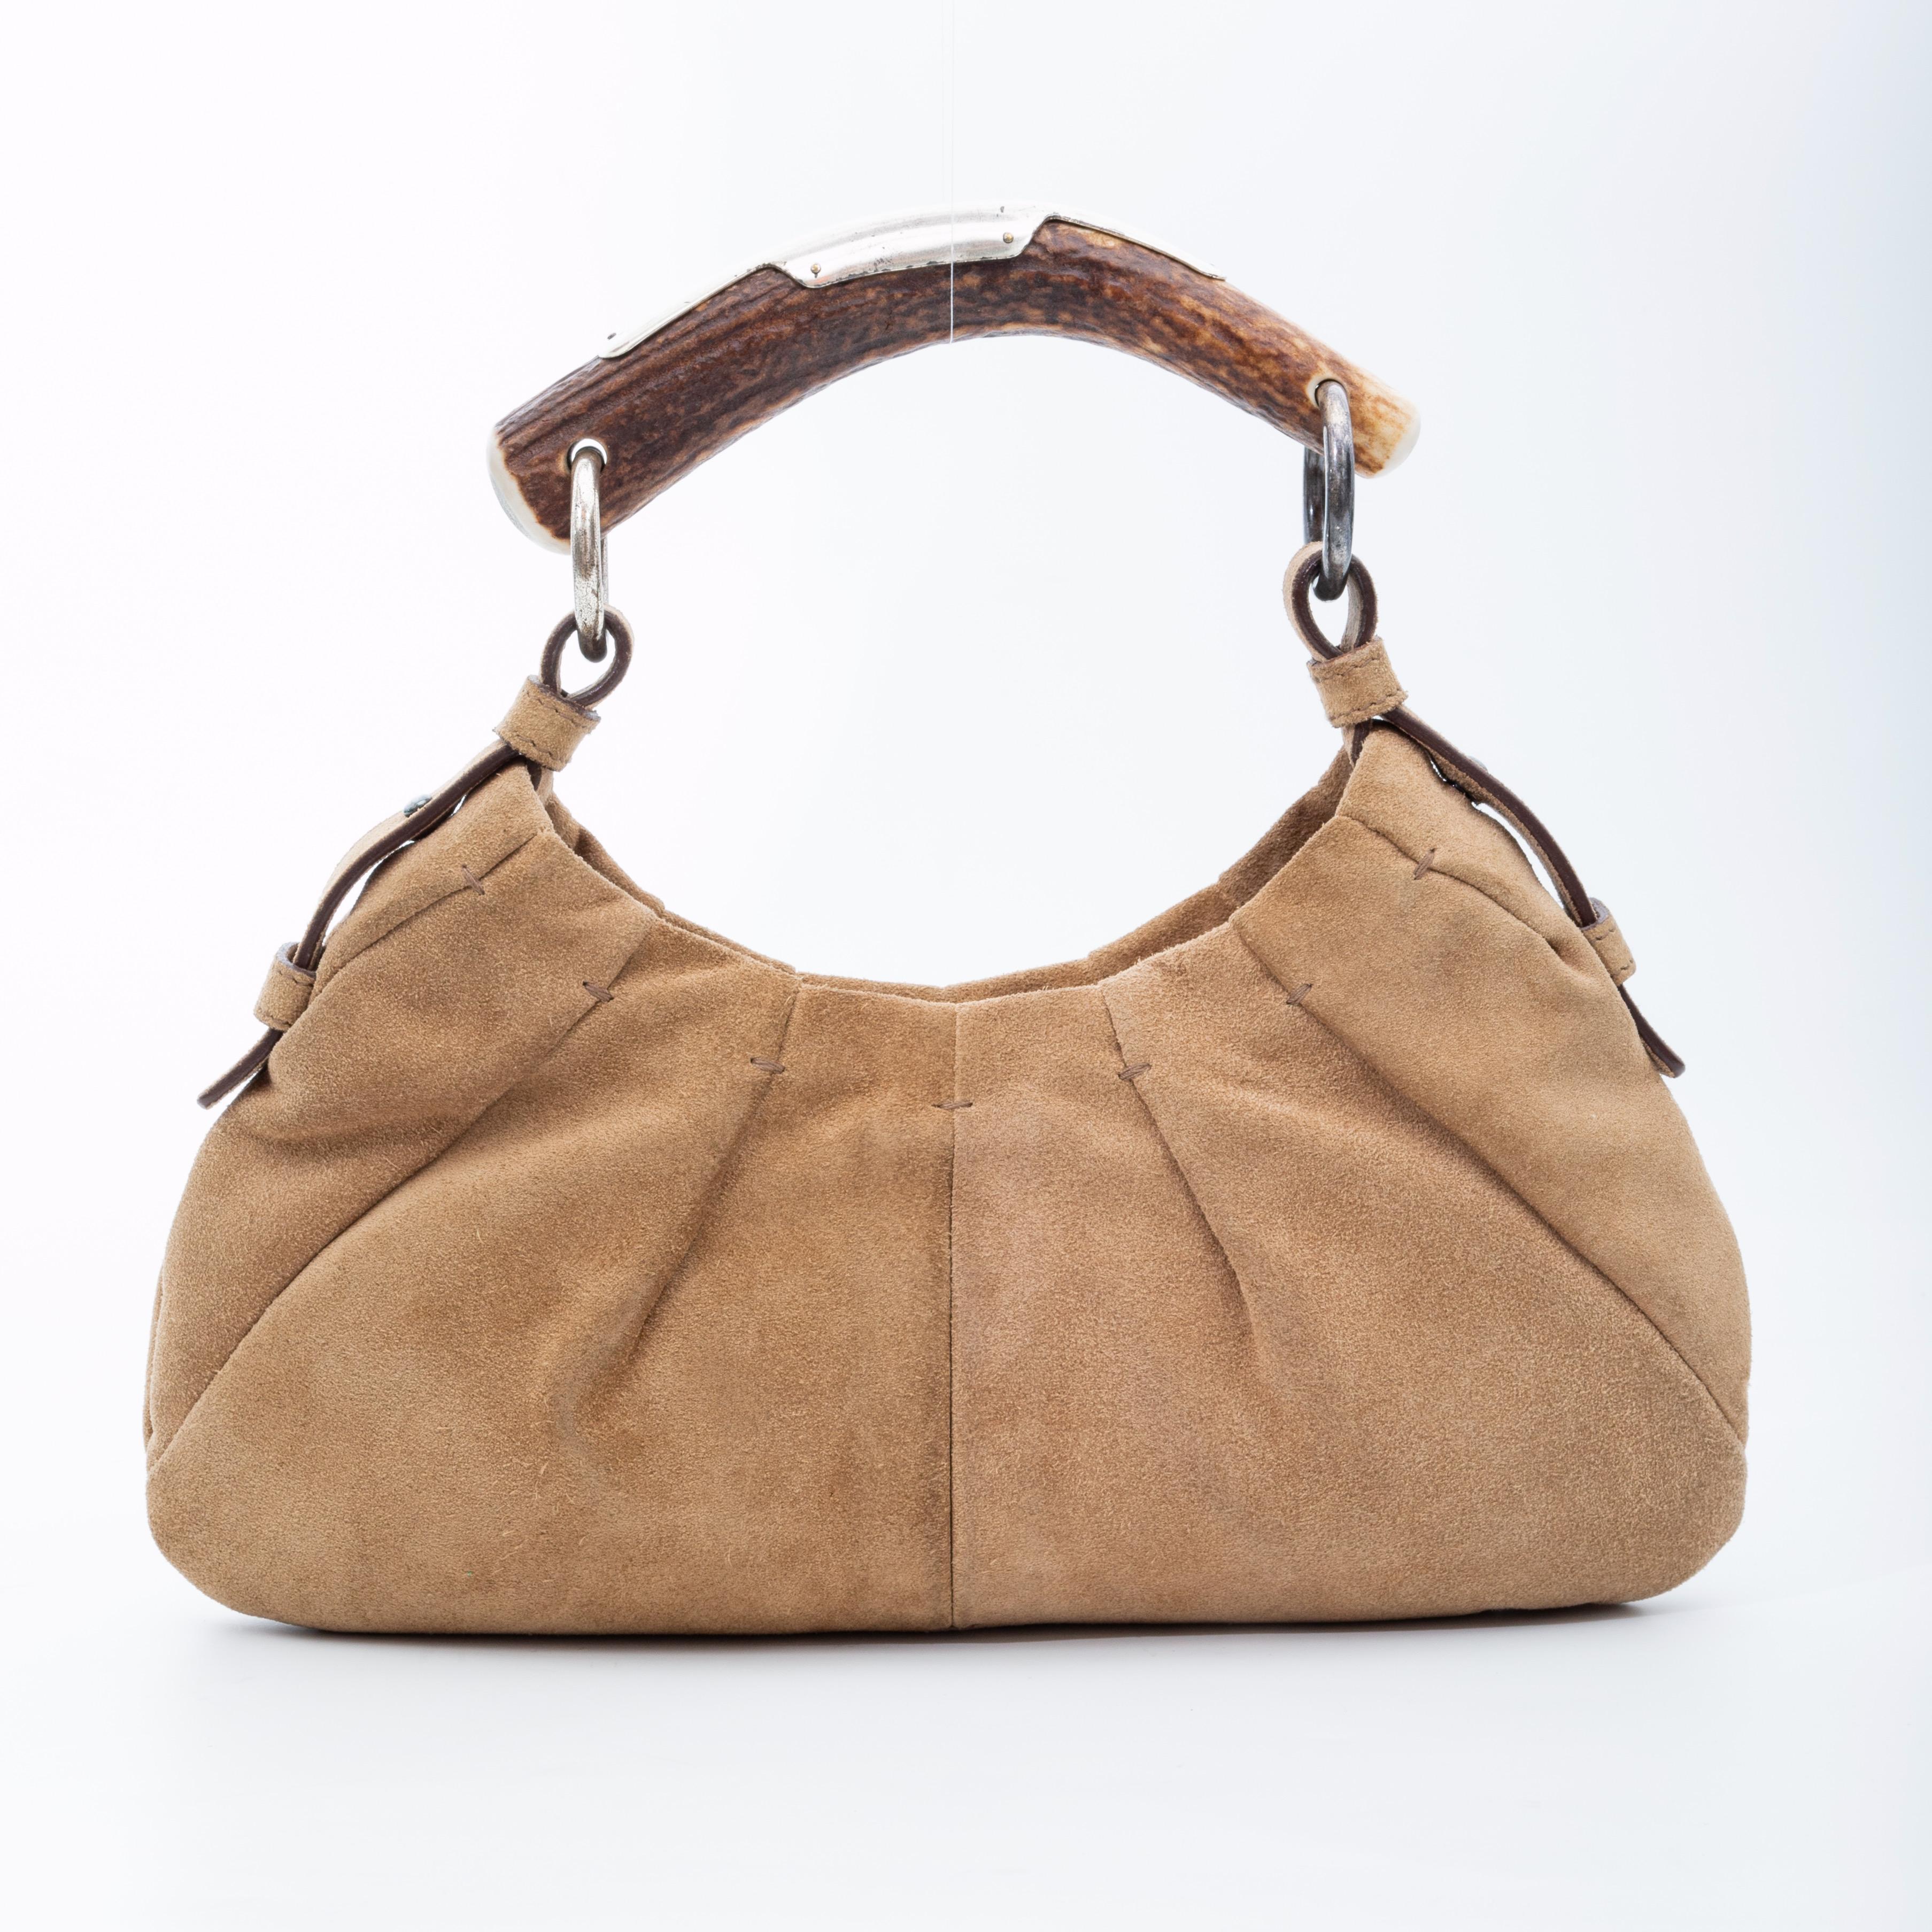 COLOR: Beige
MATERIAL: Suede and deer antler
ITEM CODE: 111719 001998
MEASURES: H 5” x L 12” x D 2”
DROP: 5”
EST. RETAIL: $1900
CONDITION: Good - light discolouration, marks and signs of use.

Made in Italy